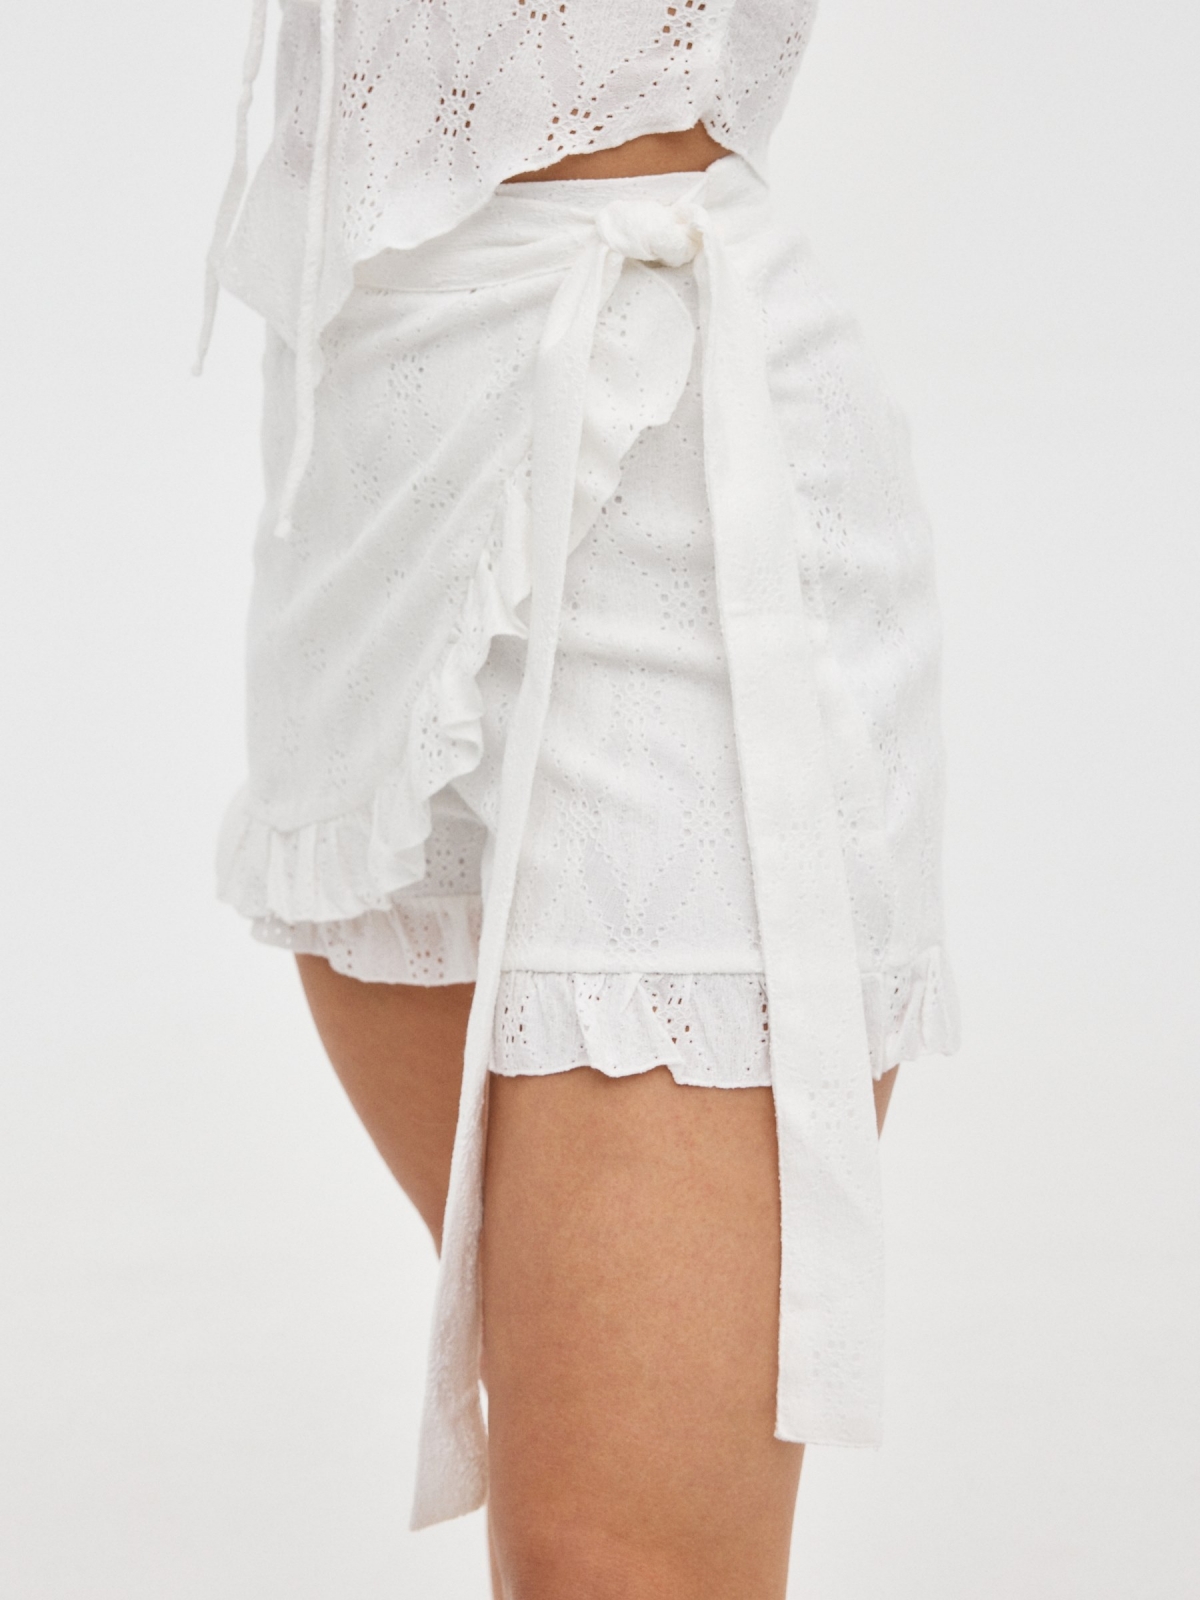 Swiss embroidered skirt white detail view